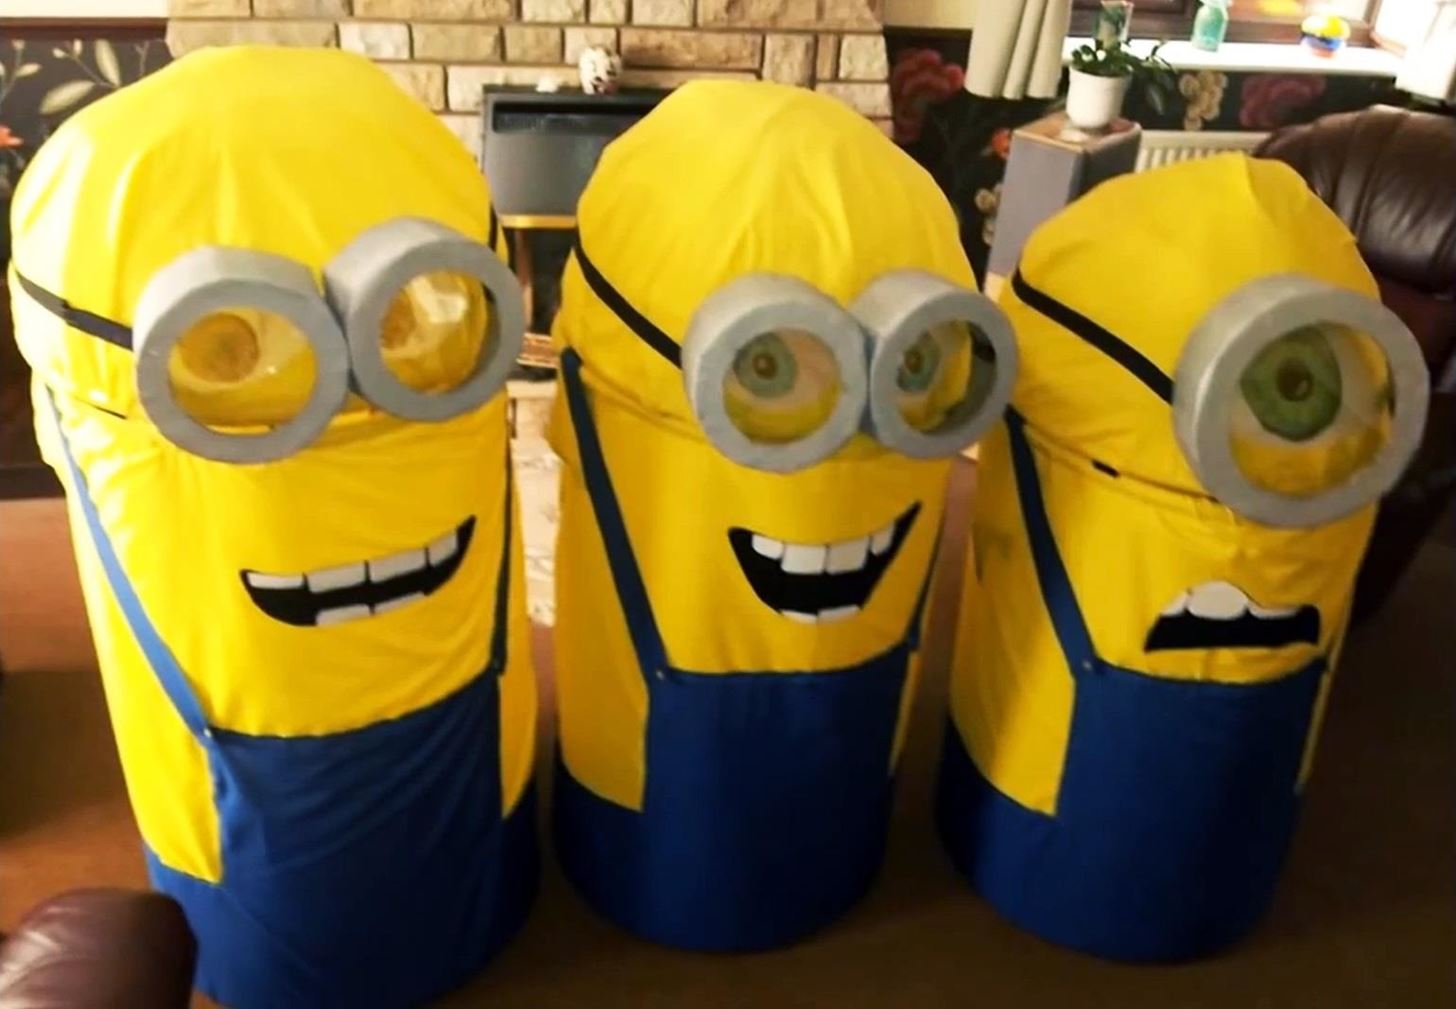 Bee-Do, Bee-Do! 5 Awesome DIY Minion Halloween Costumes from 'Despicable Me'